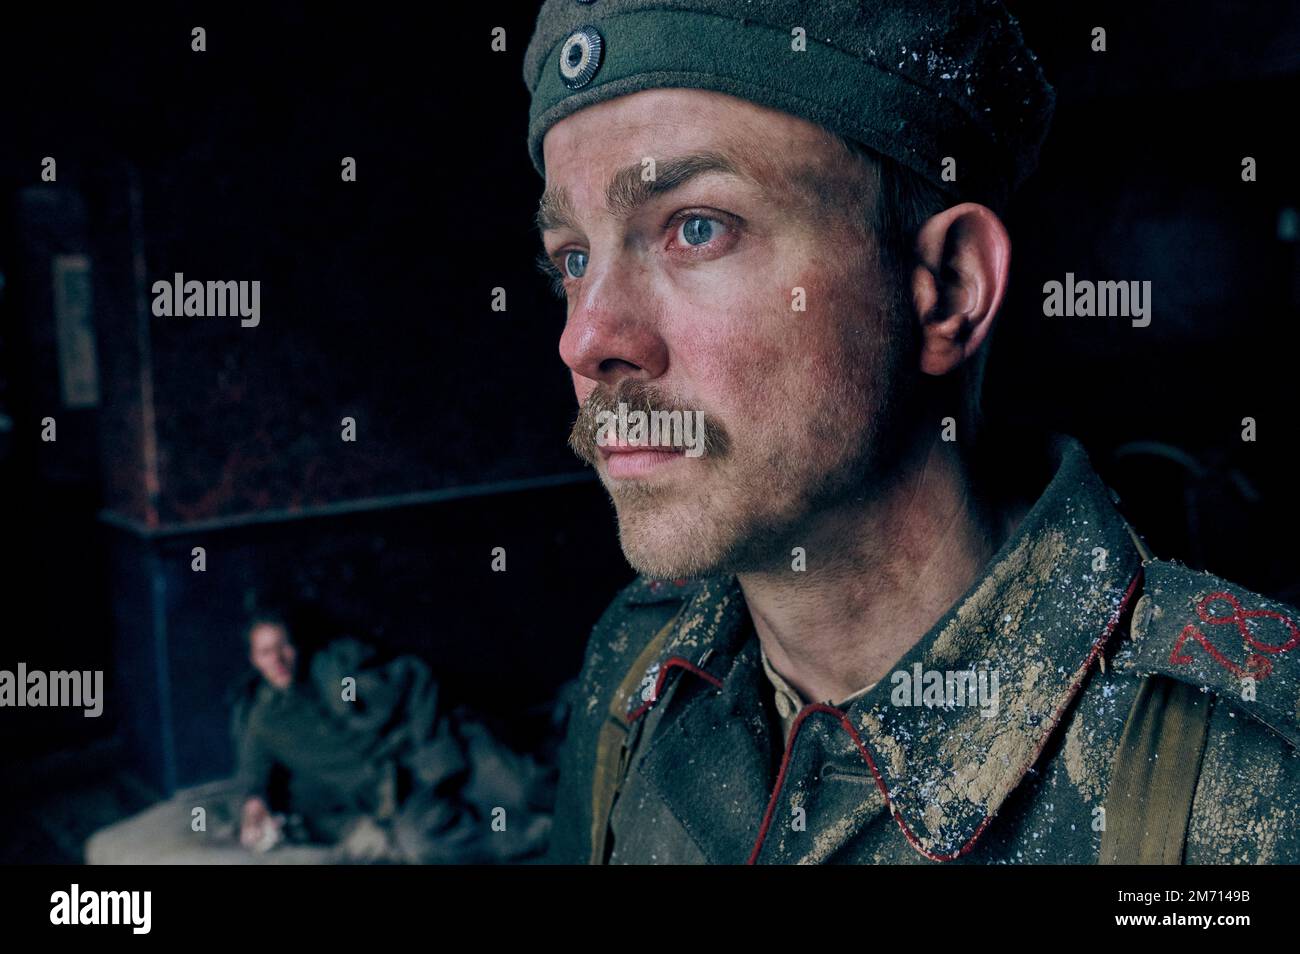 RELEASE DATE: October 28, 2022. TITLE: All Quiet On The Wester Front. STUDIO: Netflix. DIRECTOR: Edward Berger. PLOT: A young German soldier's terrifying experiences and distress on the western front during World War I. STARRING: ALBRECHT SCHUCH as Stanislaus Katczinsky. (Credit Image: © Netflix/Entertainment Pictures) Stock Photo